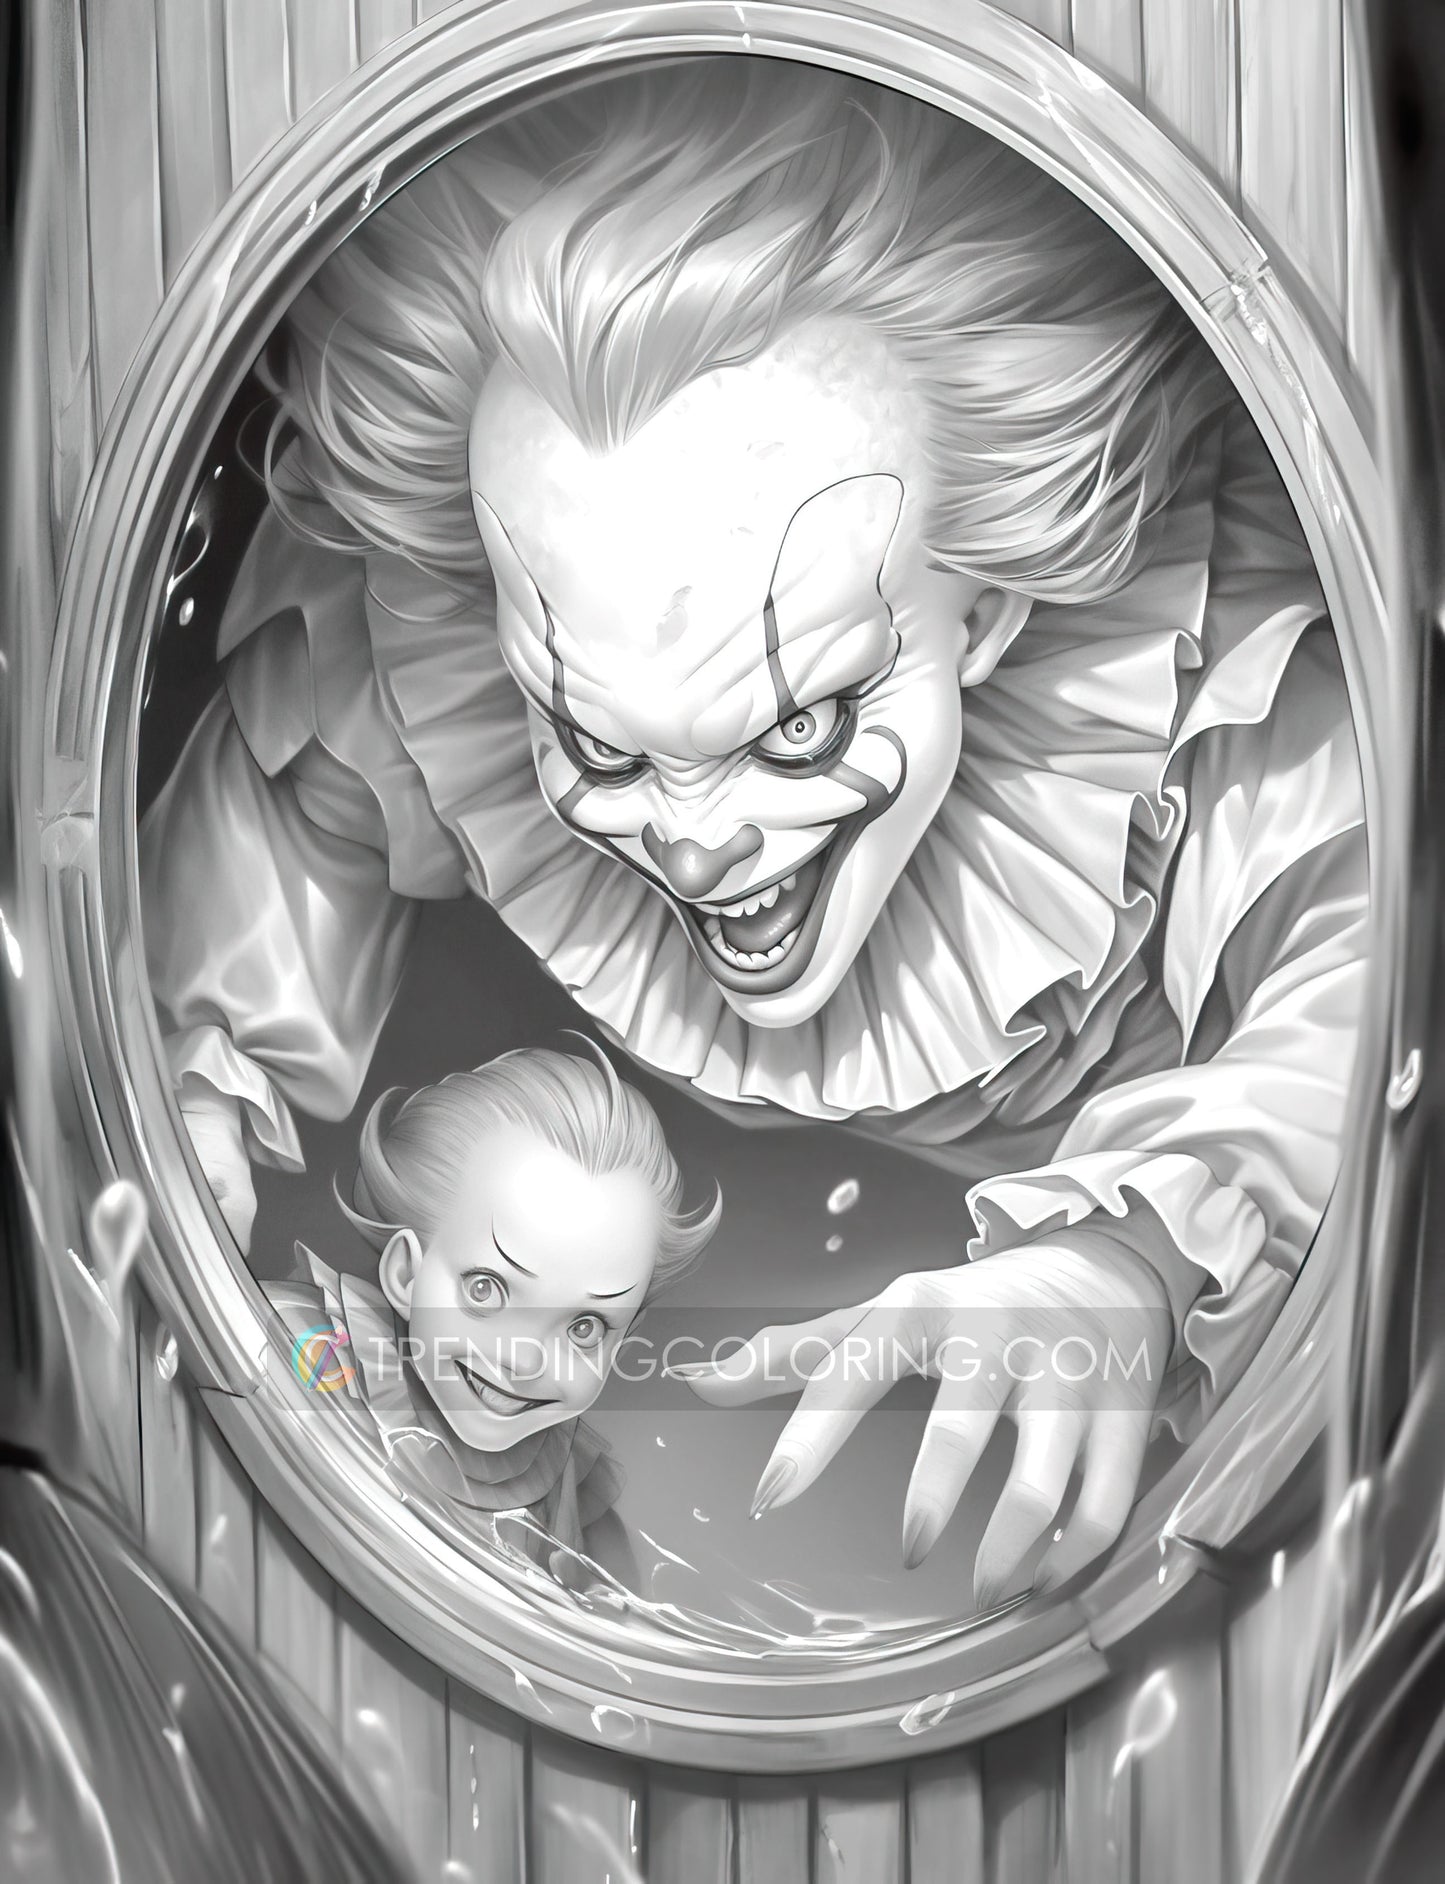 25 Devil Clowns Grayscale Coloring Pages - Halloween Coloring - Instant Download - Printable Dark/Light